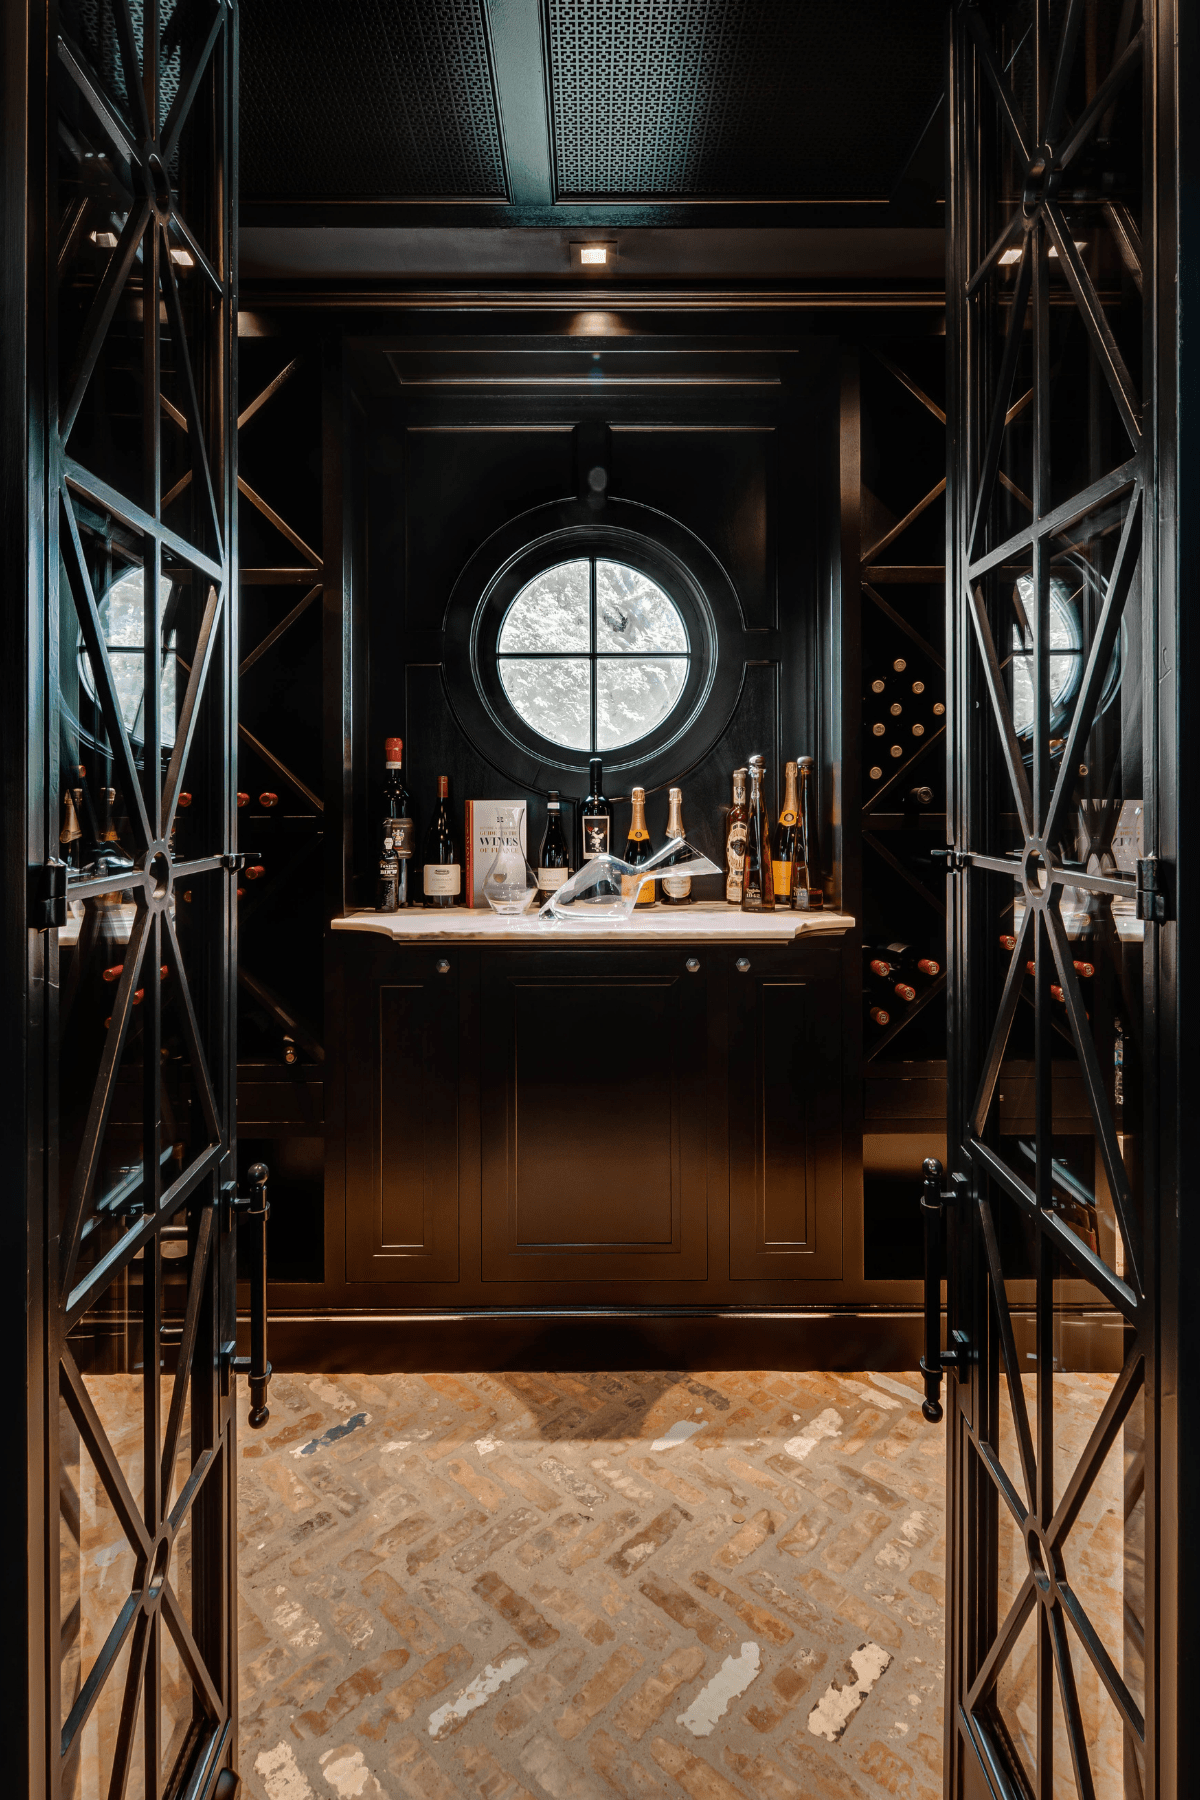 The Willowick wine cellar featuring geometric flooring and furnishing.